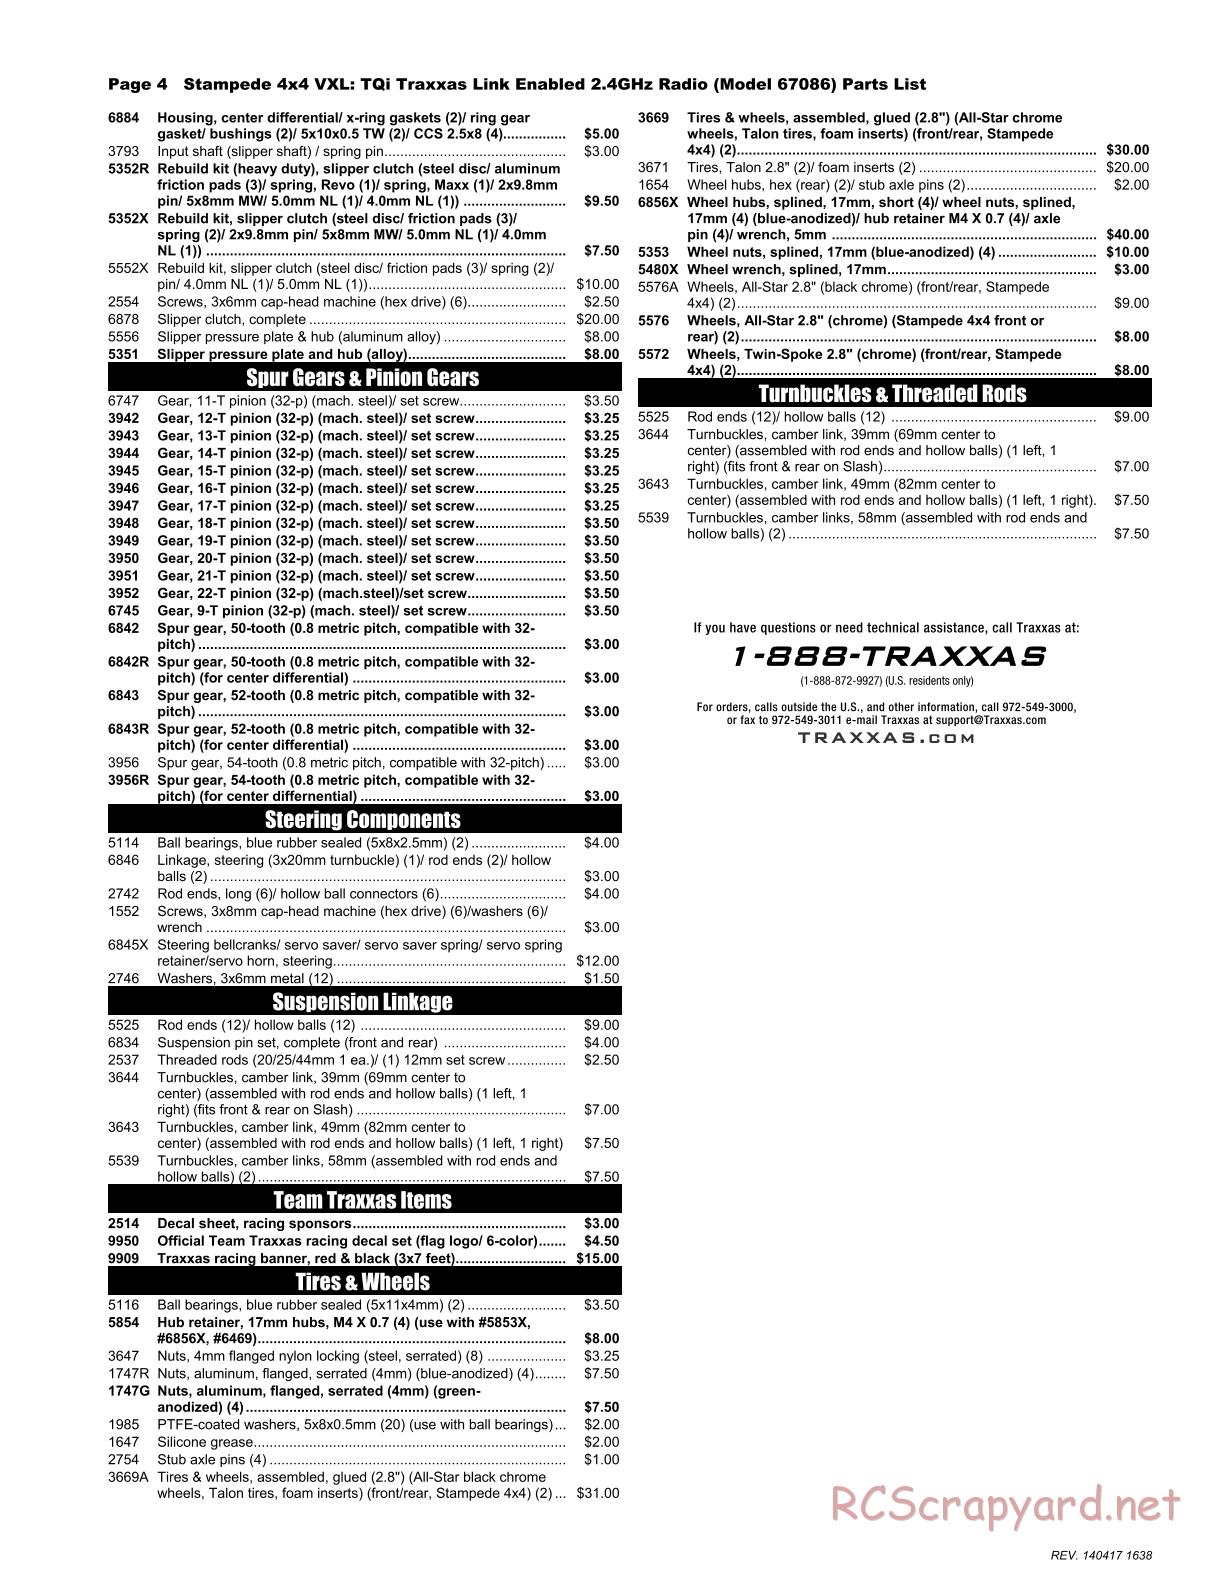 Traxxas - Stampede 4x4 VXL (2014) - Parts List - Page 4